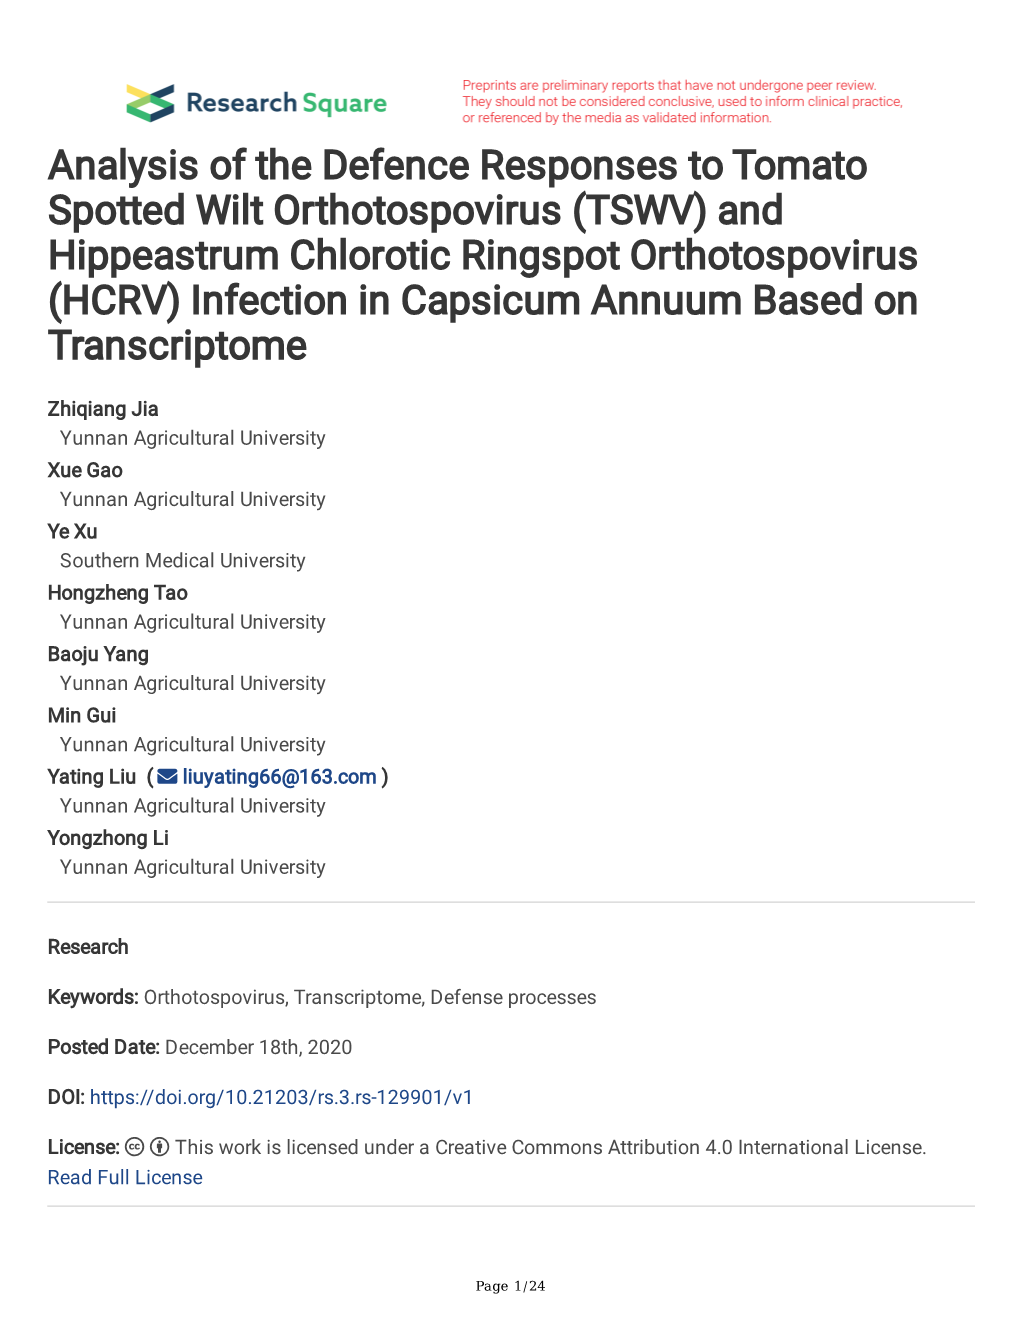 Analysis of the Defence Responses to Tomato Spotted Wilt Orthotospovirus (TSWV) and Hippeastrum Chlorotic Ringspot Orthotospovir